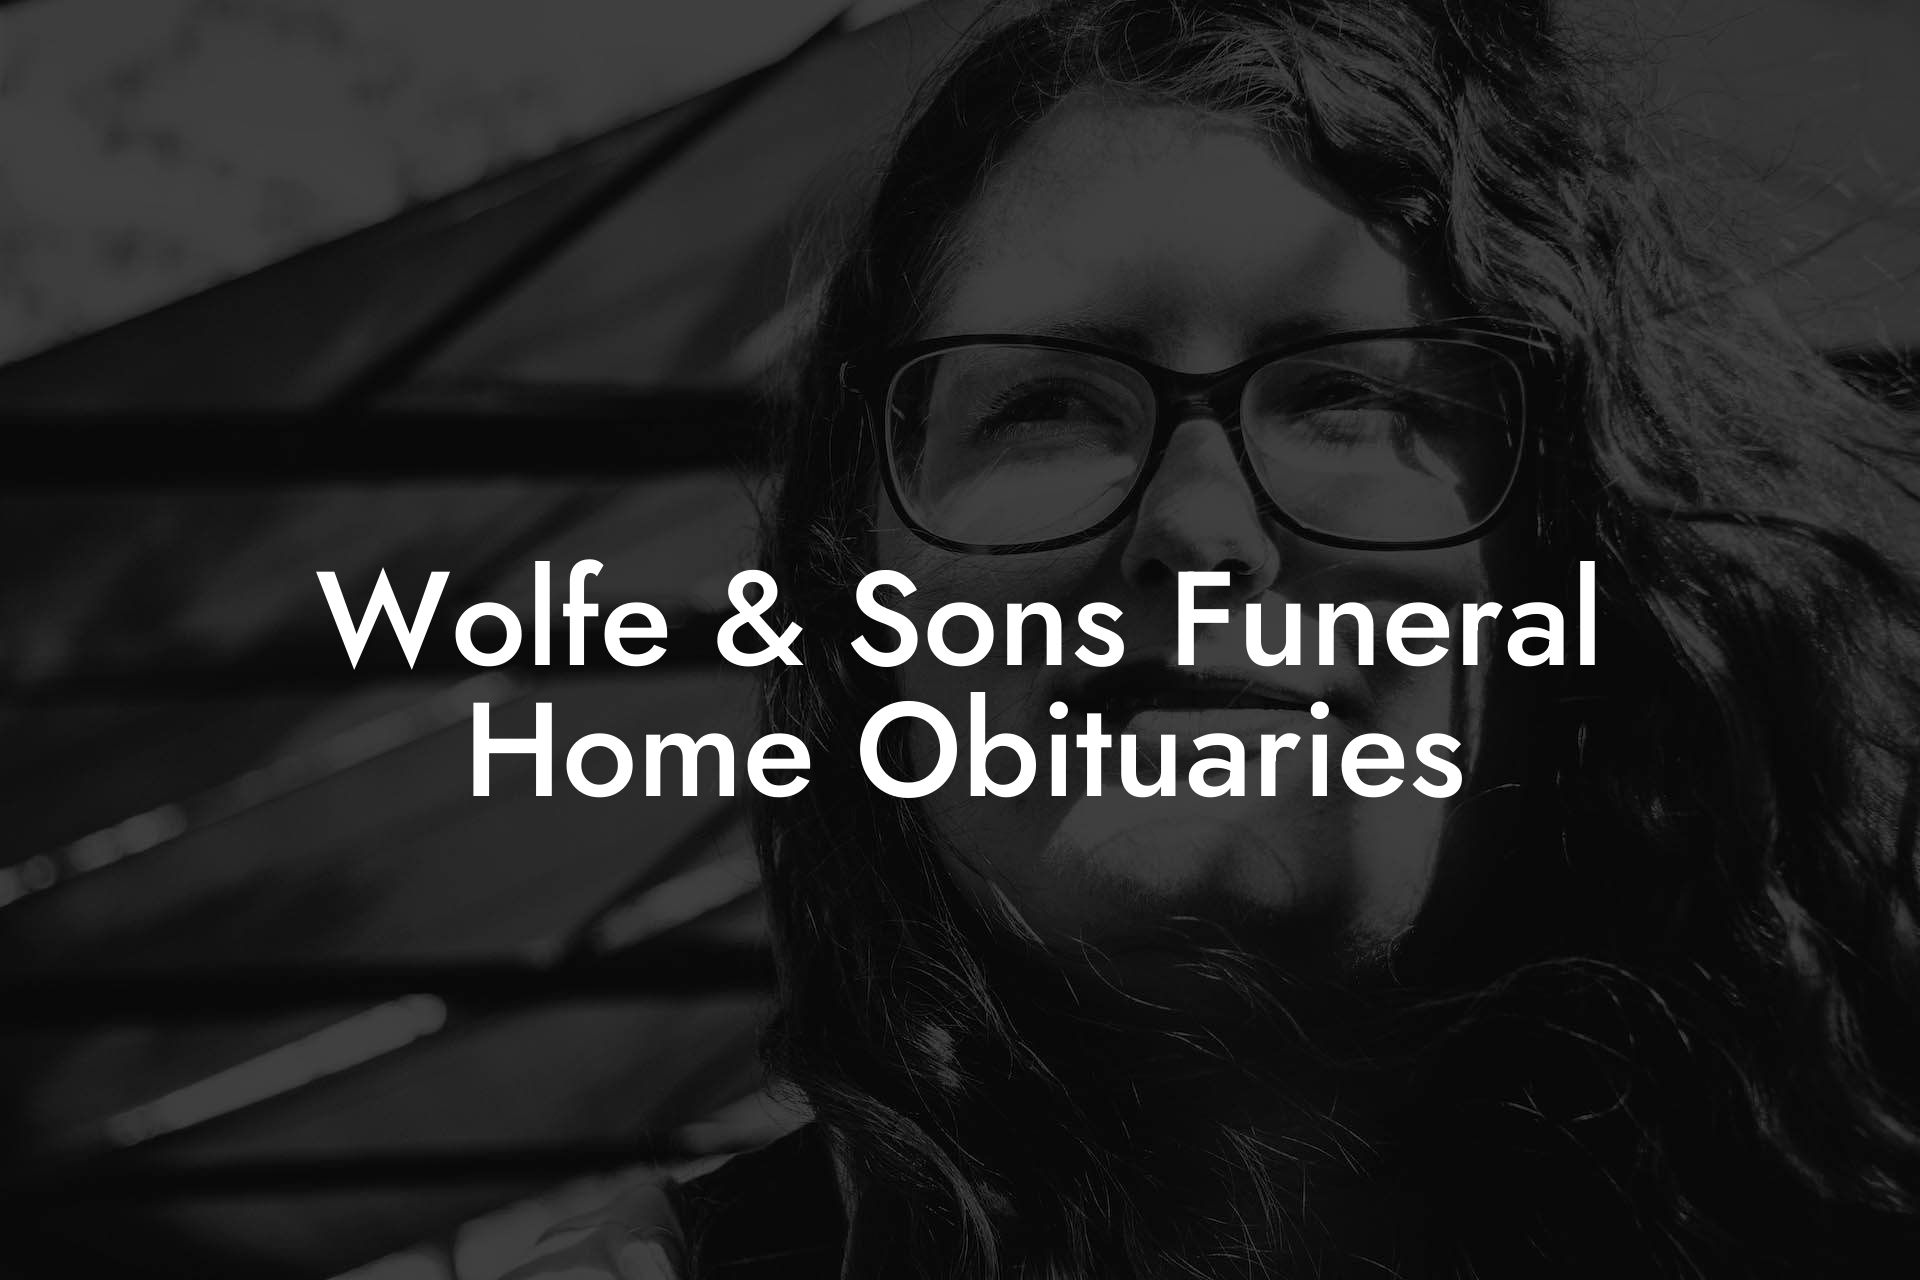 Wolfe & Sons Funeral Home Obituaries